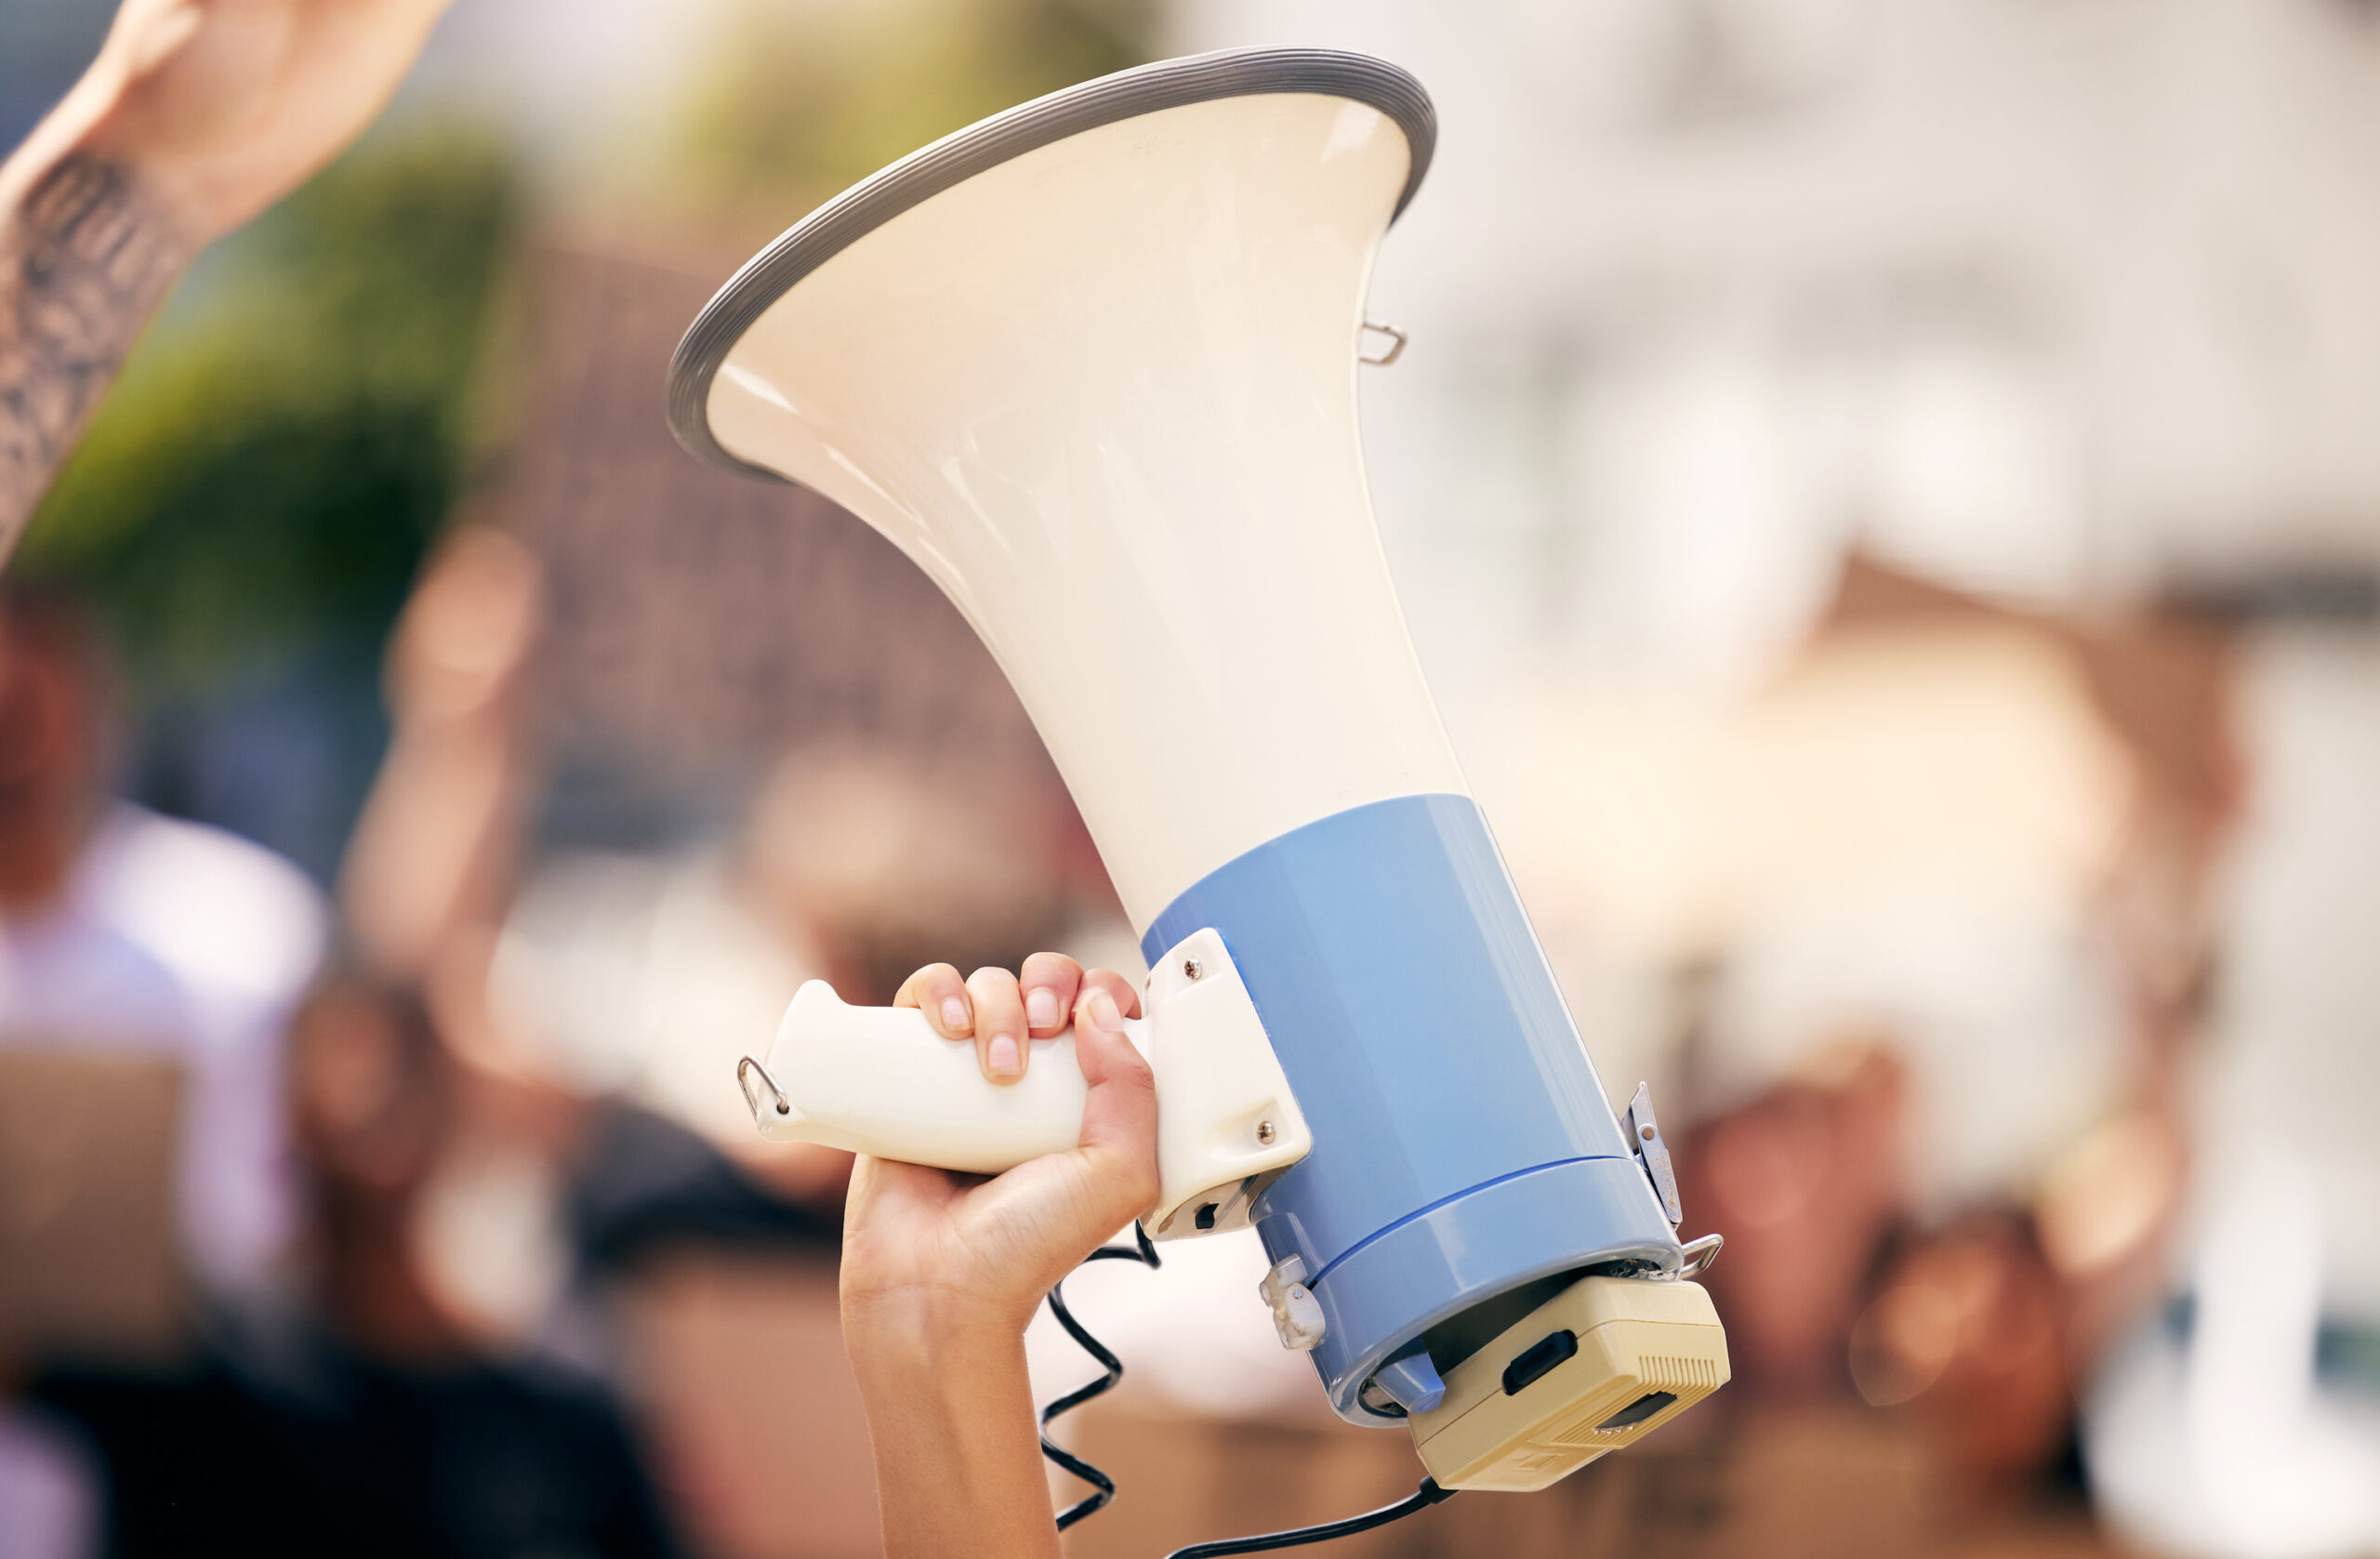 A photograph of a megaphone held in the air, representing the next gen making their voices heard.